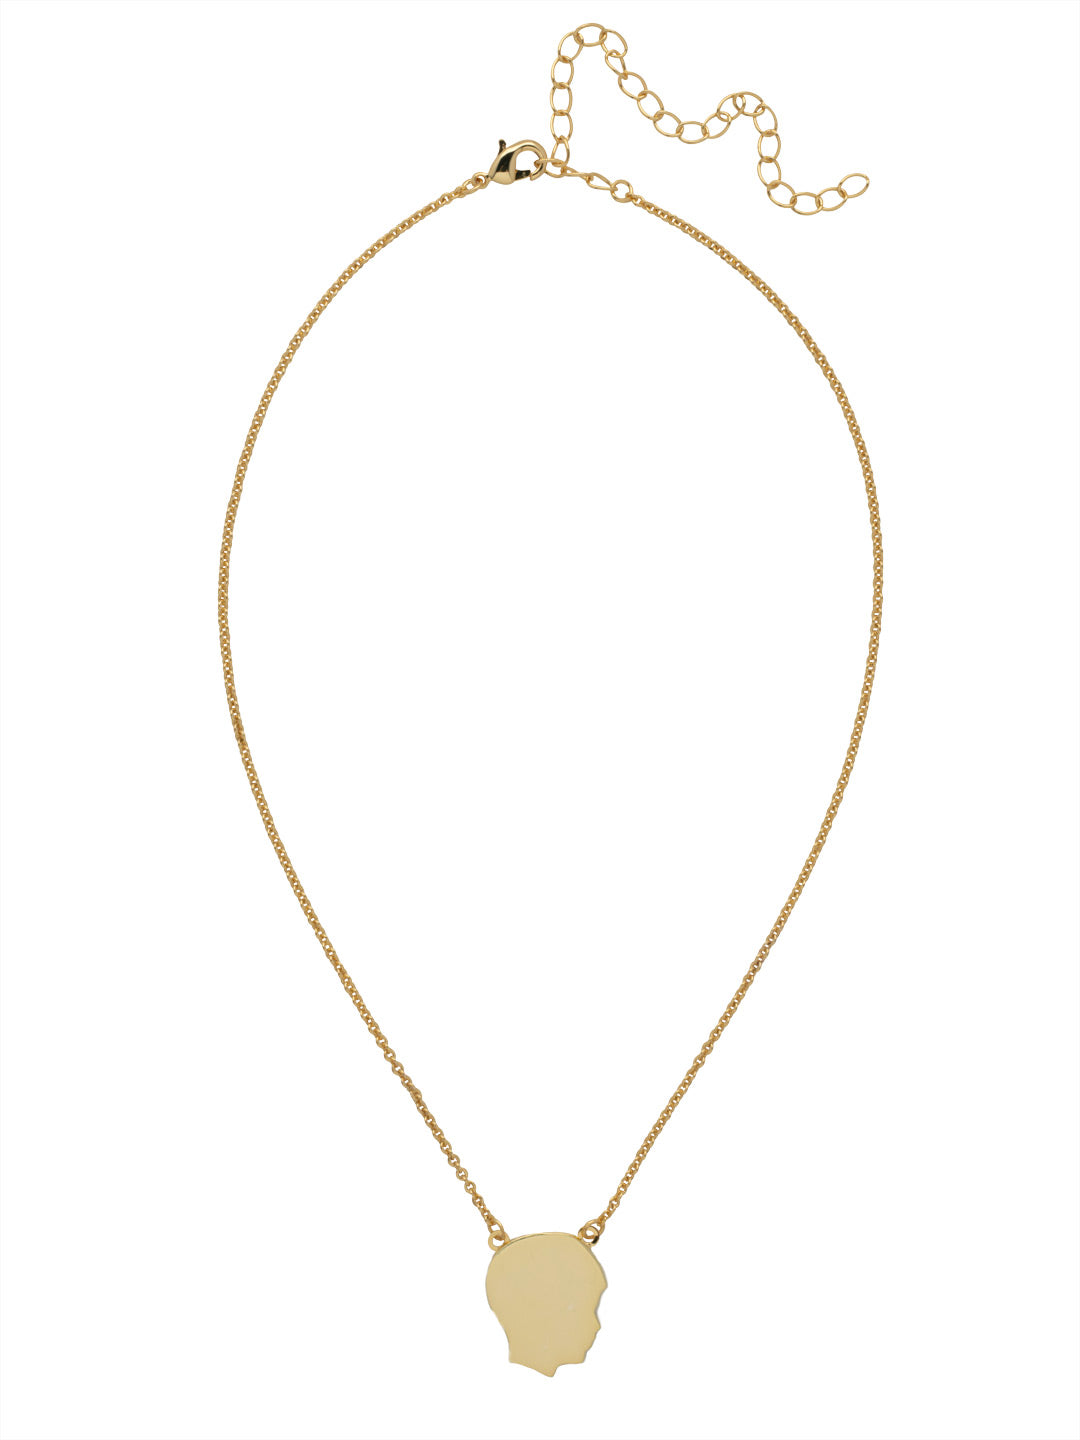 Boy Silhouette Pendant Necklace - 4NFF102BGMTL - <p>The Boy Silhouette Pendant Necklace features a metal silhouette of a boy on an adjustable, simple chain, secured with a lobster claw clasp. From Sorrelli's Bare Metallic collection in our Bright Gold-tone finish.</p>